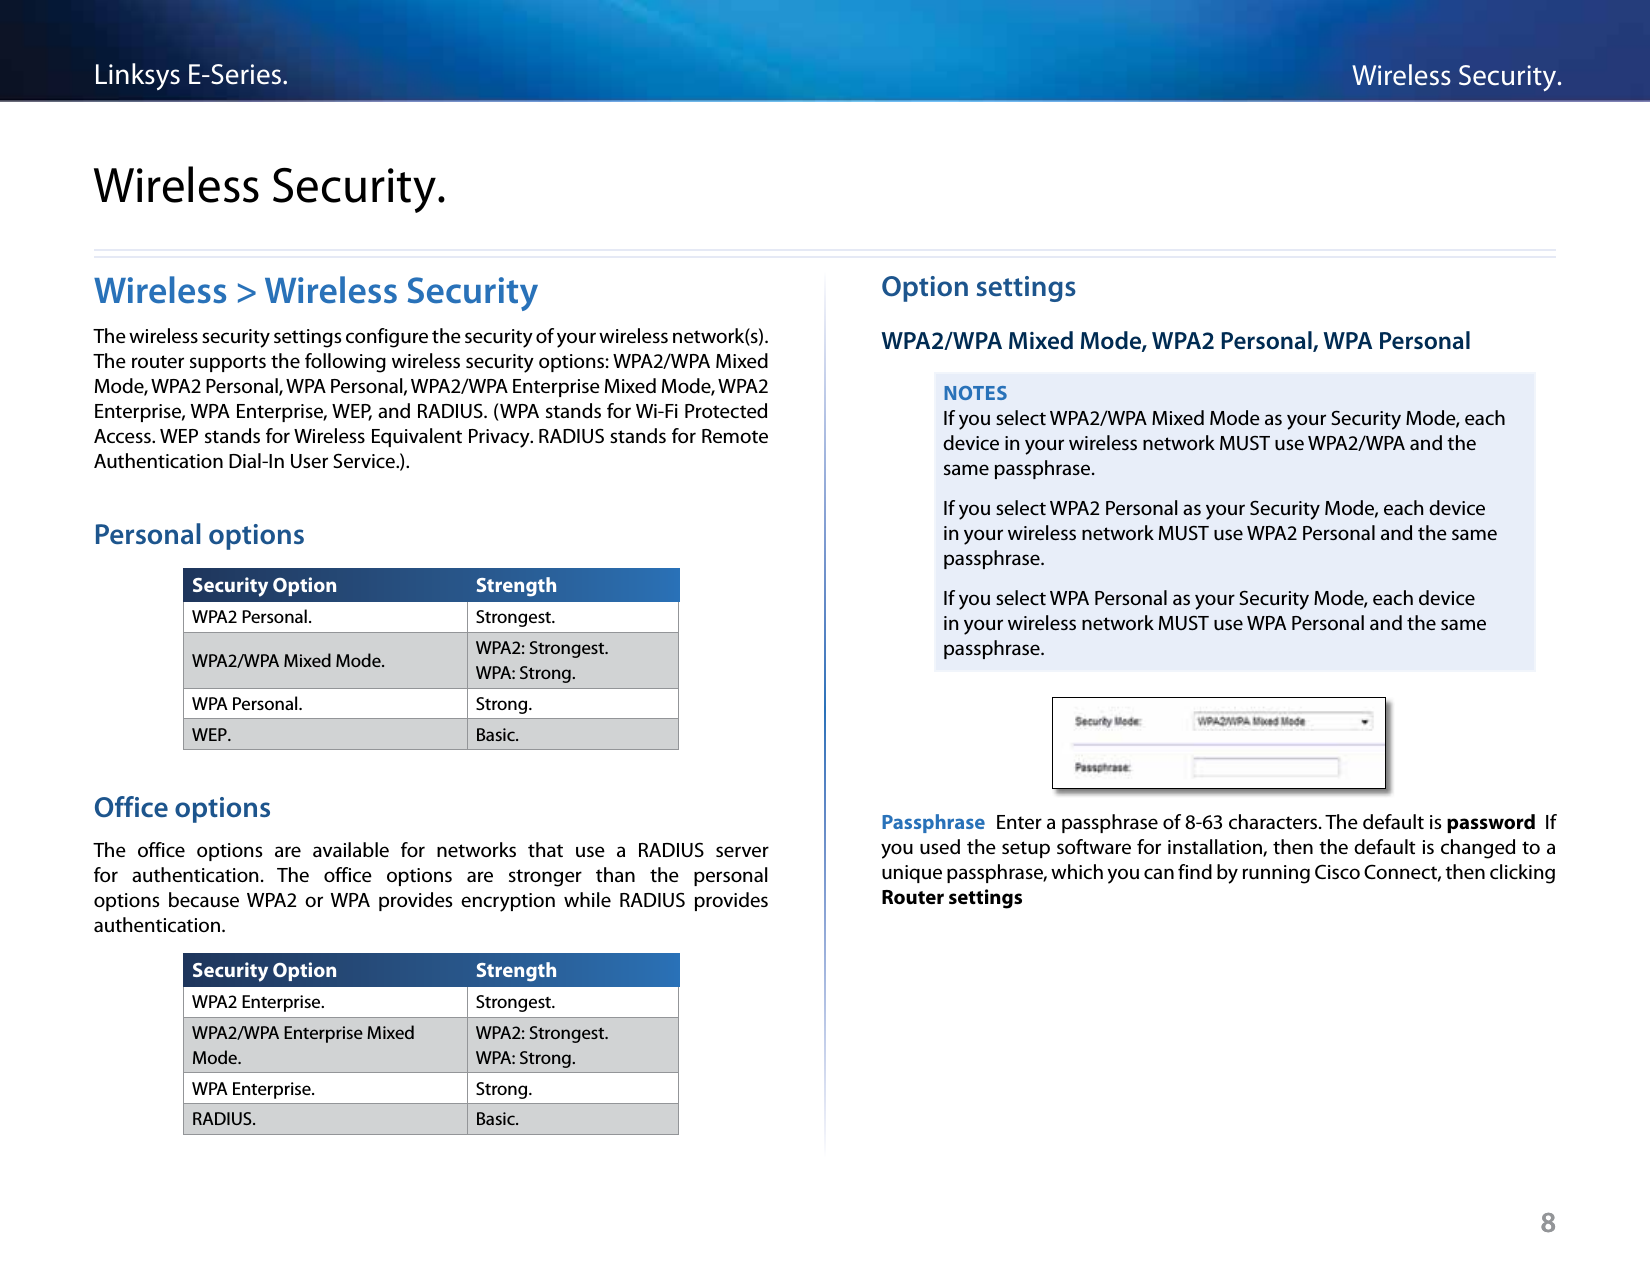 Linksys E-Series. Wireless Security.Wireless Security.Wireless &gt; Wireless Security  Option settings The wireless security settings configure the security of your wireless network(s). WPA2/WPA Mixed Mode, WPA2 Personal, WPA Personal The router supports the following wireless security options: WPA2/WPA Mixed Mode, WPA2 Personal, WPA Personal, WPA2/WPA Enterprise Mixed Mode, WPA2 Enterprise, WPA Enterprise, WEP, and RADIUS. (WPA stands for Wi-Fi Protected Access. WEP stands for Wireless Equivalent Privacy. RADIUS stands for Remote Authentication Dial-In User Service.).Personal options NOTES If you select WPA2/WPA Mixed Mode as your Security Mode, each device in your wireless network MUST use WPA2/WPA and the same passphrase.If you select WPA2 Personal as your Security Mode, each device in your wireless network MUST use WPA2 Personal and the same passphrase.If you select WPA Personal as your Security Mode, each device in your wireless network MUST use WPA Personal and the same passphrase.Security Option  Strength WPA2 Personal. Strongest.WPA2/WPA Mixed Mode. WPA2: Strongest.WPA: Strong.WPA Personal. Strong.WEP. Basic.Office options The  office  options  are  available  for  networks  that  use  a  RADIUS  server for  authentication. The  office  options  are  stronger  than  the  personal options  because  WPA2  or  WPA  provides  encryption  while  RADIUS  provides authentication.Passphrase  Enter a passphrase of 8-63 characters. The default is password  If you used the setup software for installation, then the default is changed to a unique passphrase, which you can find by running Cisco Connect, then clicking Router settings Security Option  Strength WPA2 Enterprise. Strongest.WPA2/WPA Enterprise Mixed  WPA2: Strongest.Mode. WPA: Strong.WPA Enterprise. Strong.RADIUS. Basic.8 8